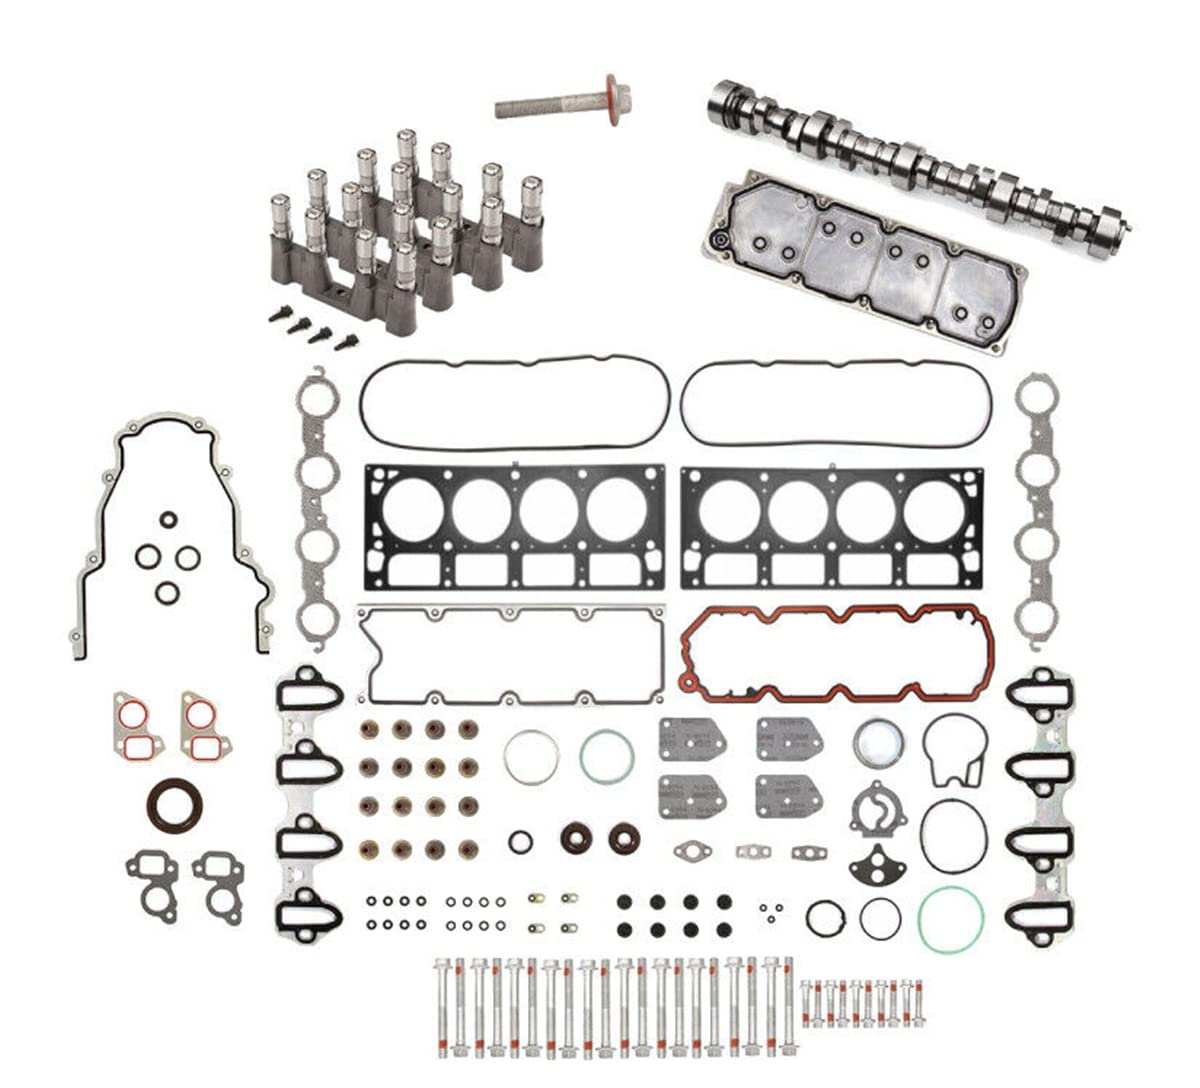 AFM DOD Remove KIT Compatible with 2007-2015 Chevy Silverado Sierra Truck 5.3L 5.3 with CAMSHAFT GASKETS Bolts Lifters Valley Plate